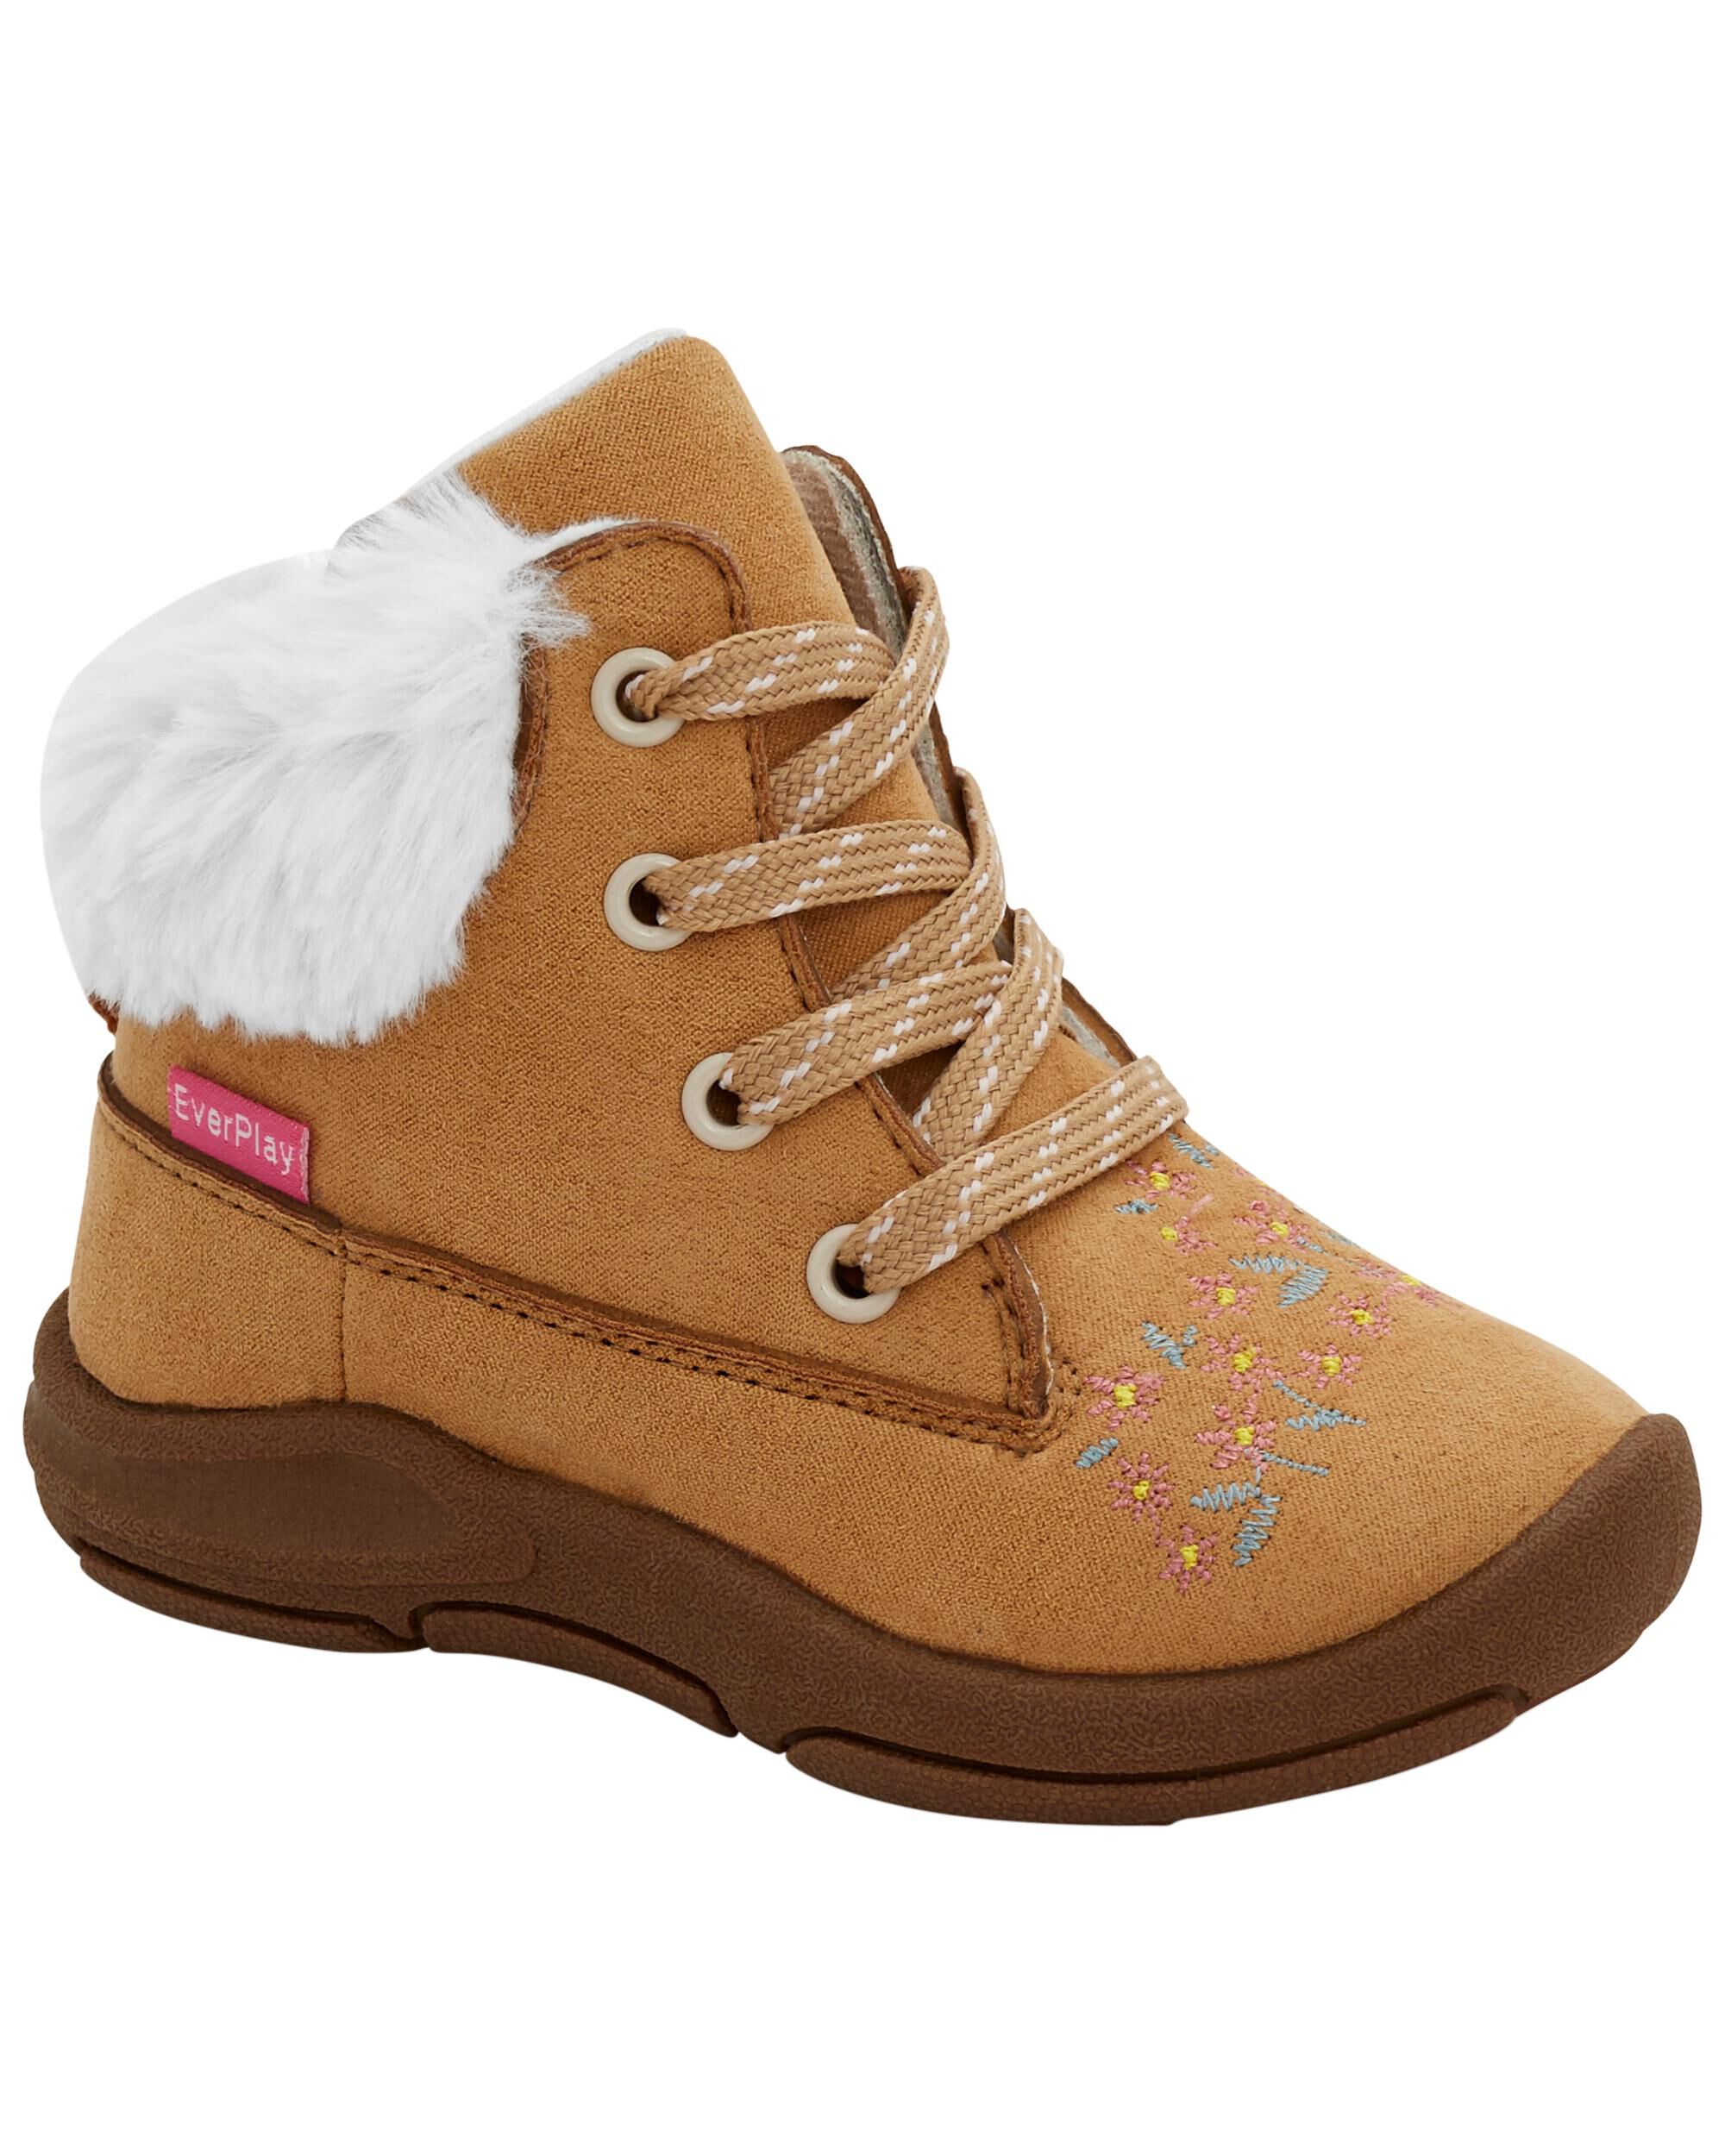 Carters Toddler Faux Fur EverPlay Boots